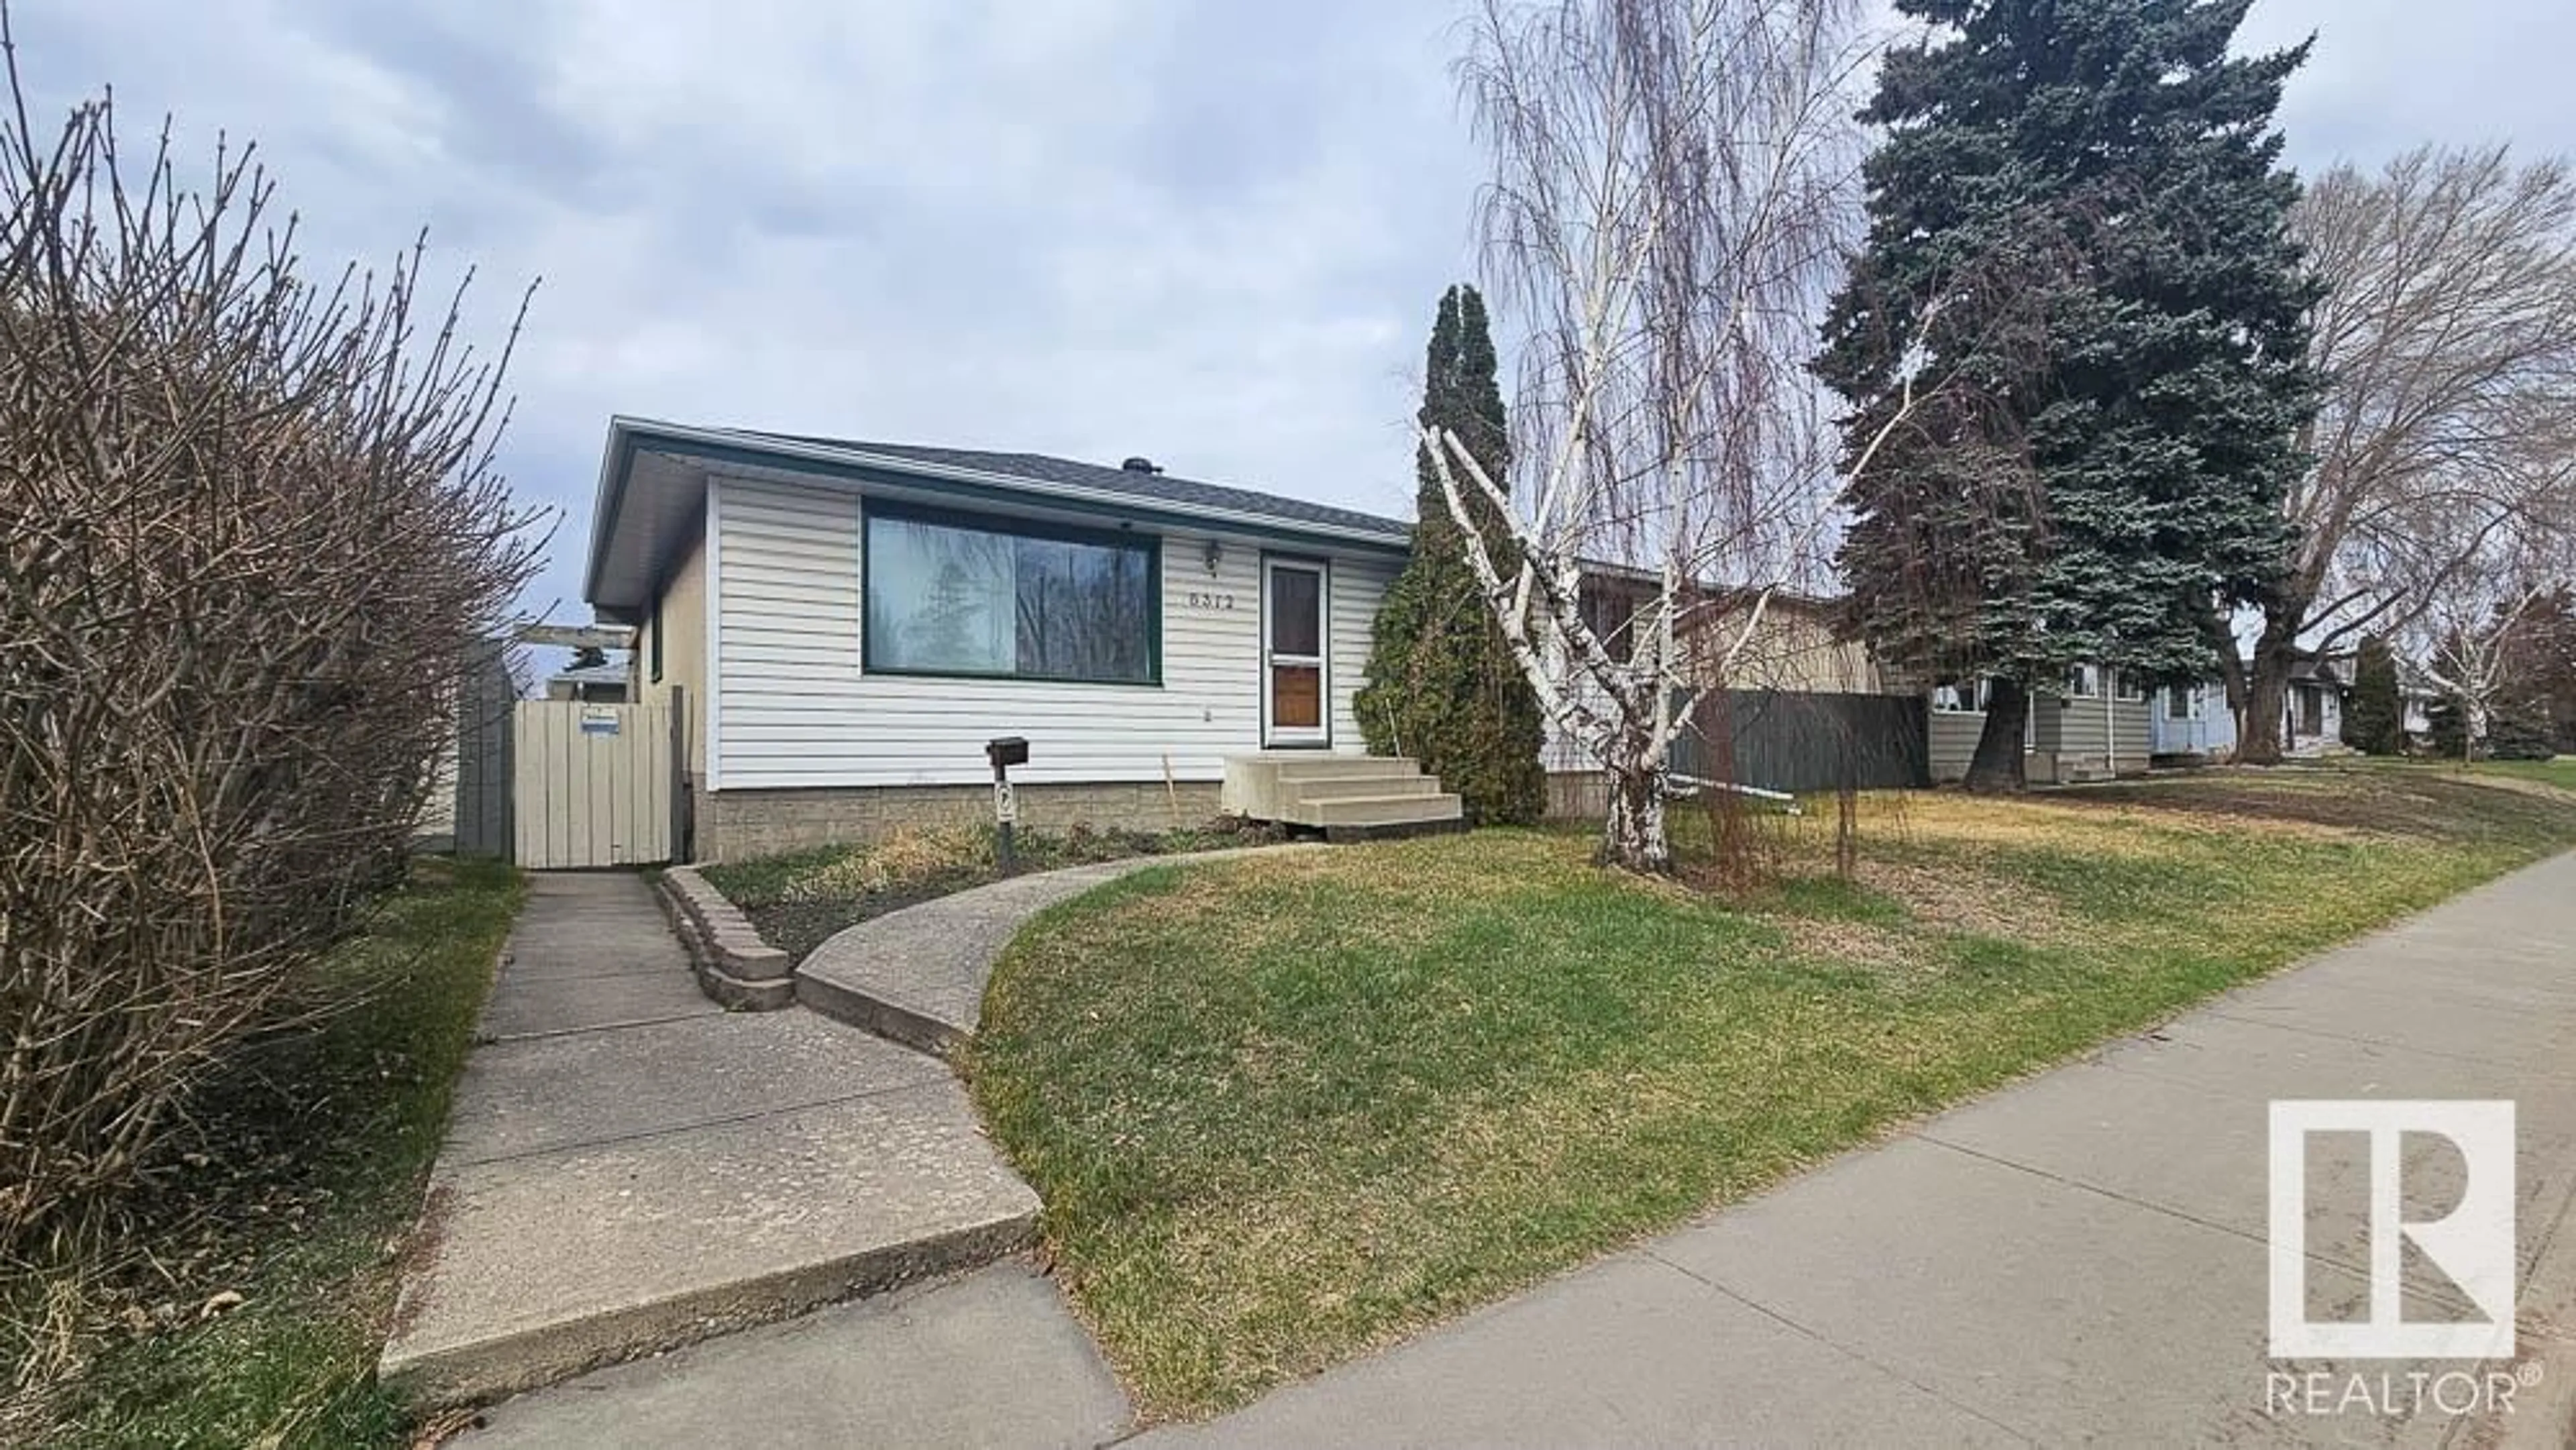 A pic from exterior of the house or condo for 6312 144 AV NW, Edmonton Alberta T5A1K9